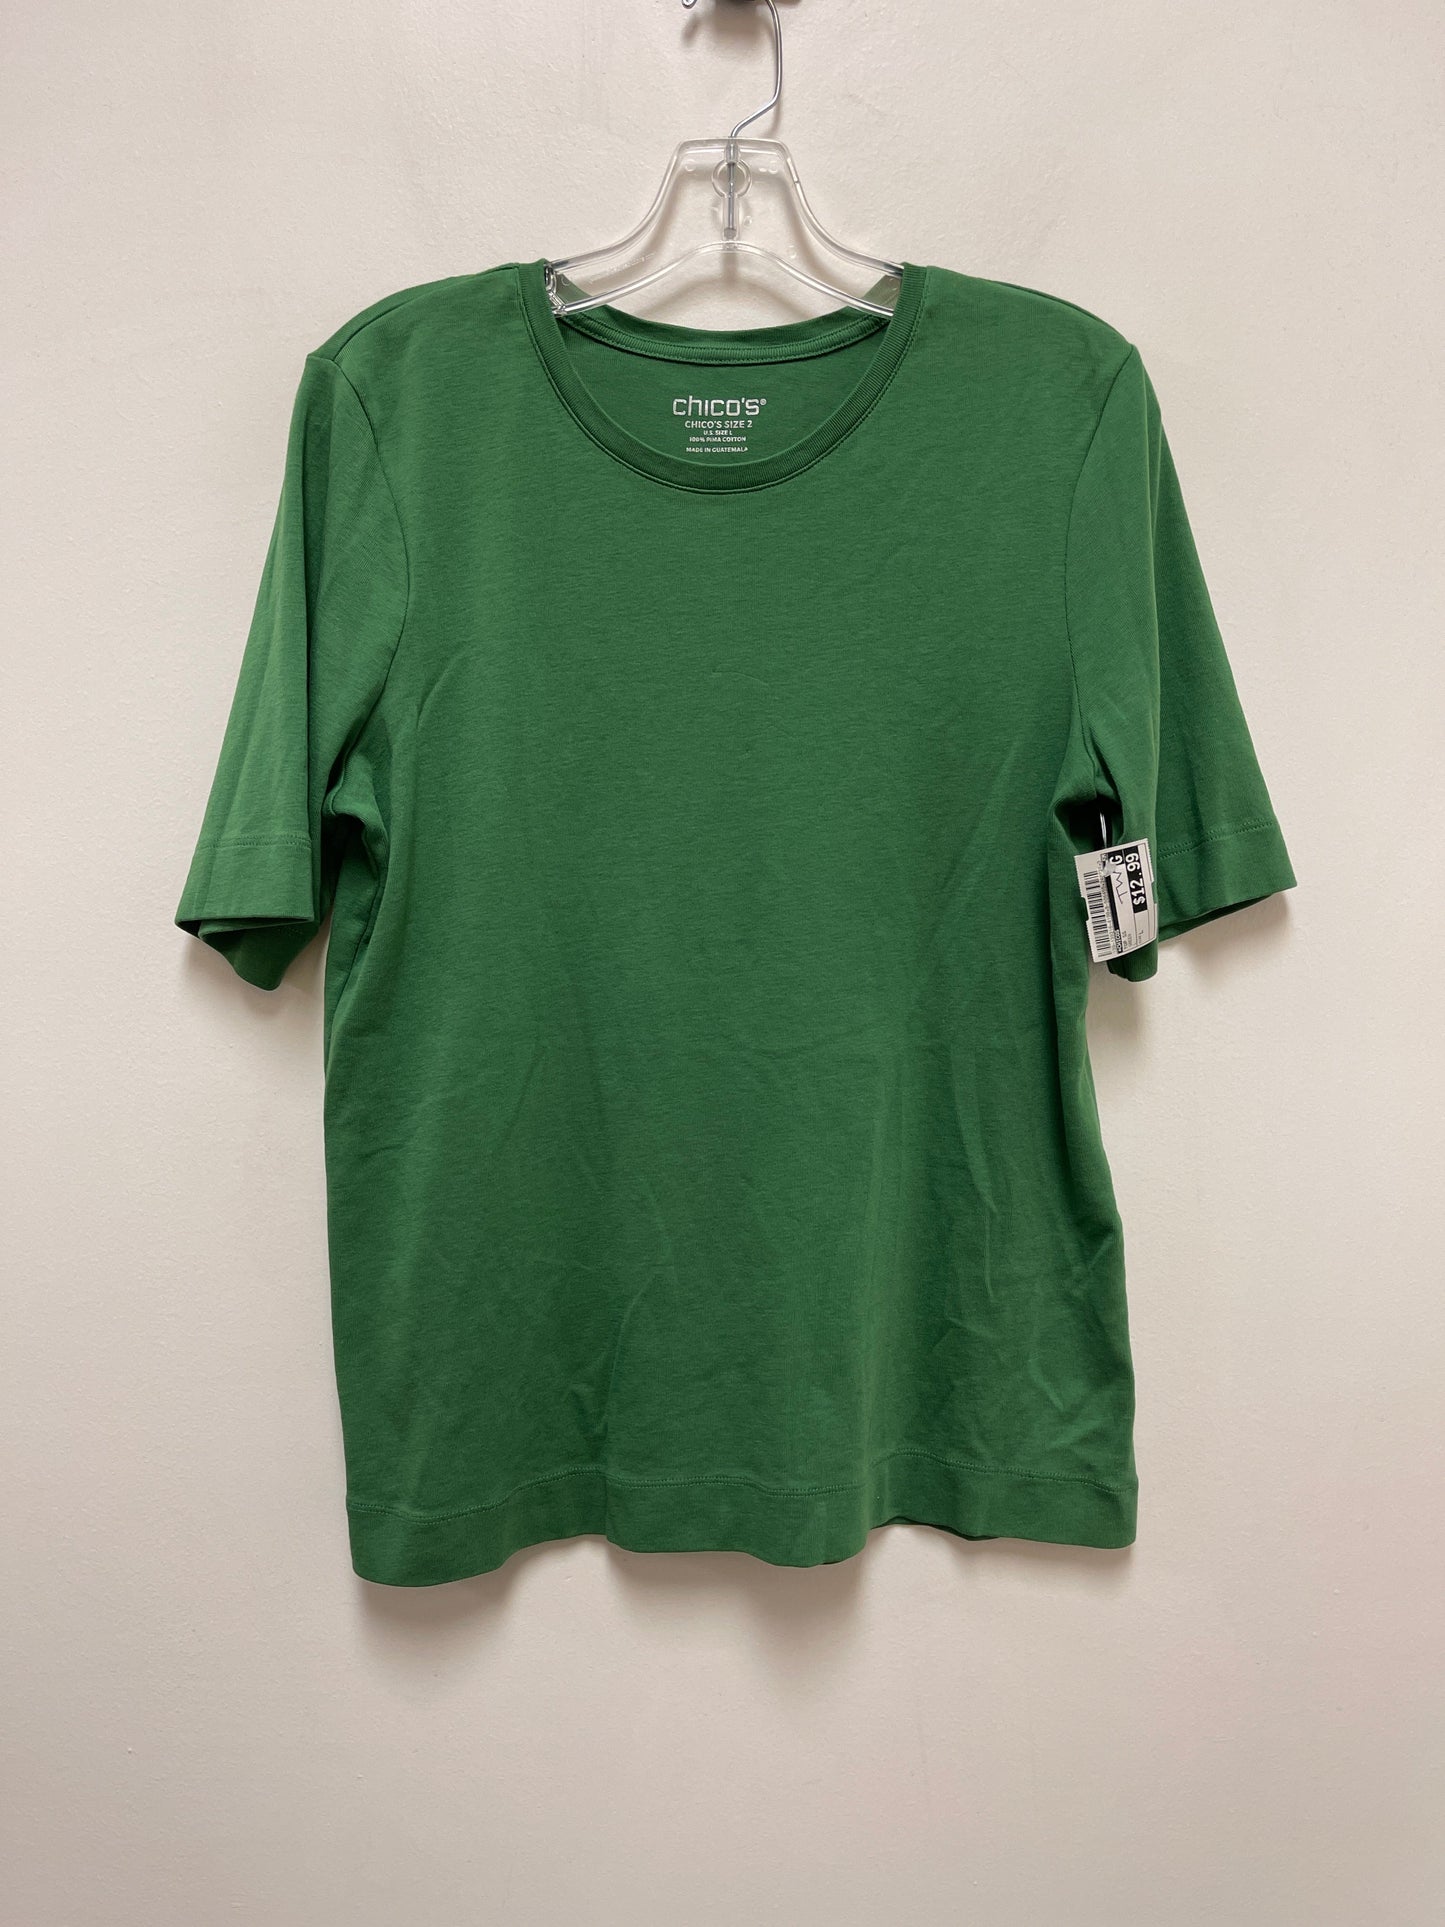 Green Top Short Sleeve Chicos, Size L